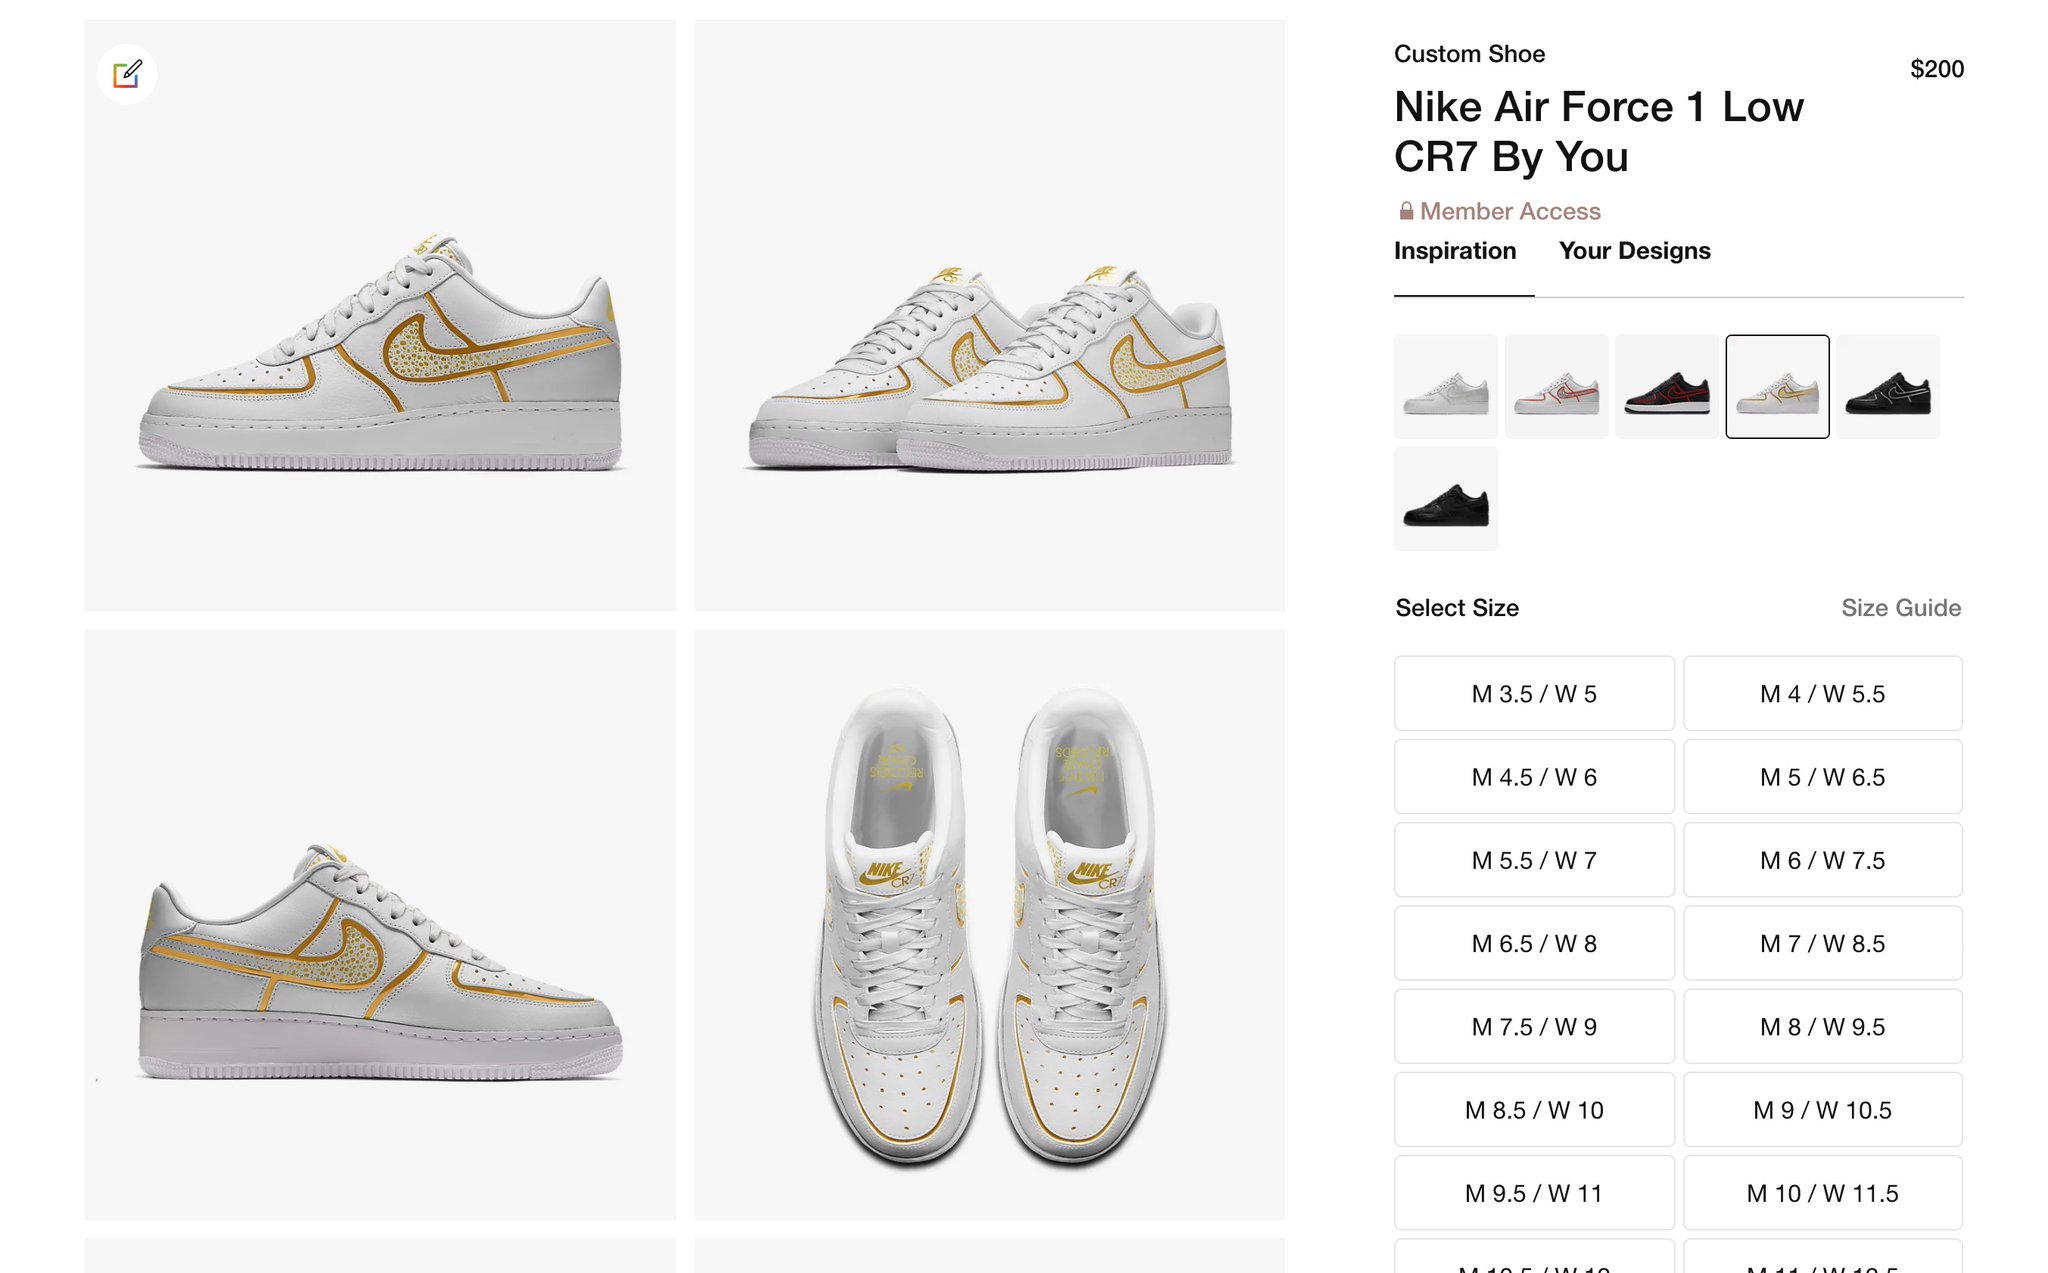 J23 Iphone App Adding To Cart Nike Air Force 1 Low Cr7 By You Direct Link T Co Qlgkrysm T Co Qlgkrysm T Co Qlgkrysm T Co La23q0htmx